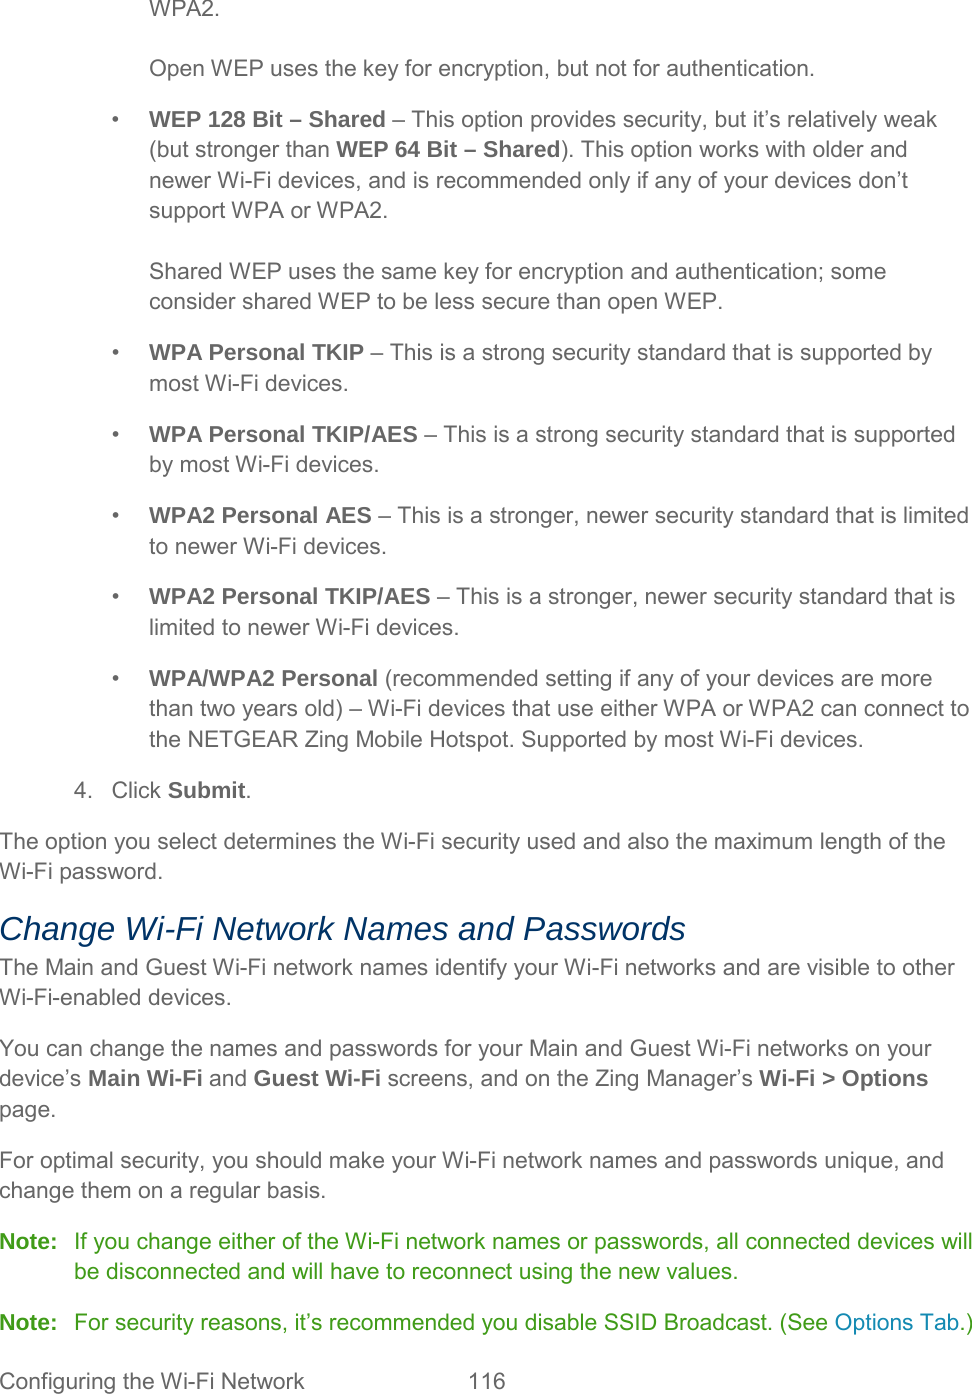 WPA2.  Open WEP uses the key for encryption, but not for authentication. •  WEP 128 Bit – Shared – This option provides security, but it’s relatively weak (but stronger than WEP 64 Bit – Shared). This option works with older and newer Wi-Fi devices, and is recommended only if any of your devices don’t support WPA or WPA2.  Shared WEP uses the same key for encryption and authentication; some consider shared WEP to be less secure than open WEP. •  WPA Personal TKIP – This is a strong security standard that is supported by most Wi-Fi devices. •  WPA Personal TKIP/AES – This is a strong security standard that is supported by most Wi-Fi devices. •  WPA2 Personal AES – This is a stronger, newer security standard that is limited to newer Wi-Fi devices. •  WPA2 Personal TKIP/AES – This is a stronger, newer security standard that is limited to newer Wi-Fi devices. •  WPA/WPA2 Personal (recommended setting if any of your devices are more than two years old) – Wi-Fi devices that use either WPA or WPA2 can connect to the NETGEAR Zing Mobile Hotspot. Supported by most Wi-Fi devices. 4. Click Submit. The option you select determines the Wi-Fi security used and also the maximum length of the Wi-Fi password. Change Wi-Fi Network Names and Passwords The Main and Guest Wi-Fi network names identify your Wi-Fi networks and are visible to other Wi-Fi-enabled devices. You can change the names and passwords for your Main and Guest Wi-Fi networks on your device’s Main Wi-Fi and Guest Wi-Fi screens, and on the Zing Manager’s Wi-Fi &gt; Options page. For optimal security, you should make your Wi-Fi network names and passwords unique, and change them on a regular basis. Note: If you change either of the Wi-Fi network names or passwords, all connected devices will be disconnected and will have to reconnect using the new values. Note: For security reasons, it’s recommended you disable SSID Broadcast. (See Options Tab.) Configuring the Wi-Fi Network 116   